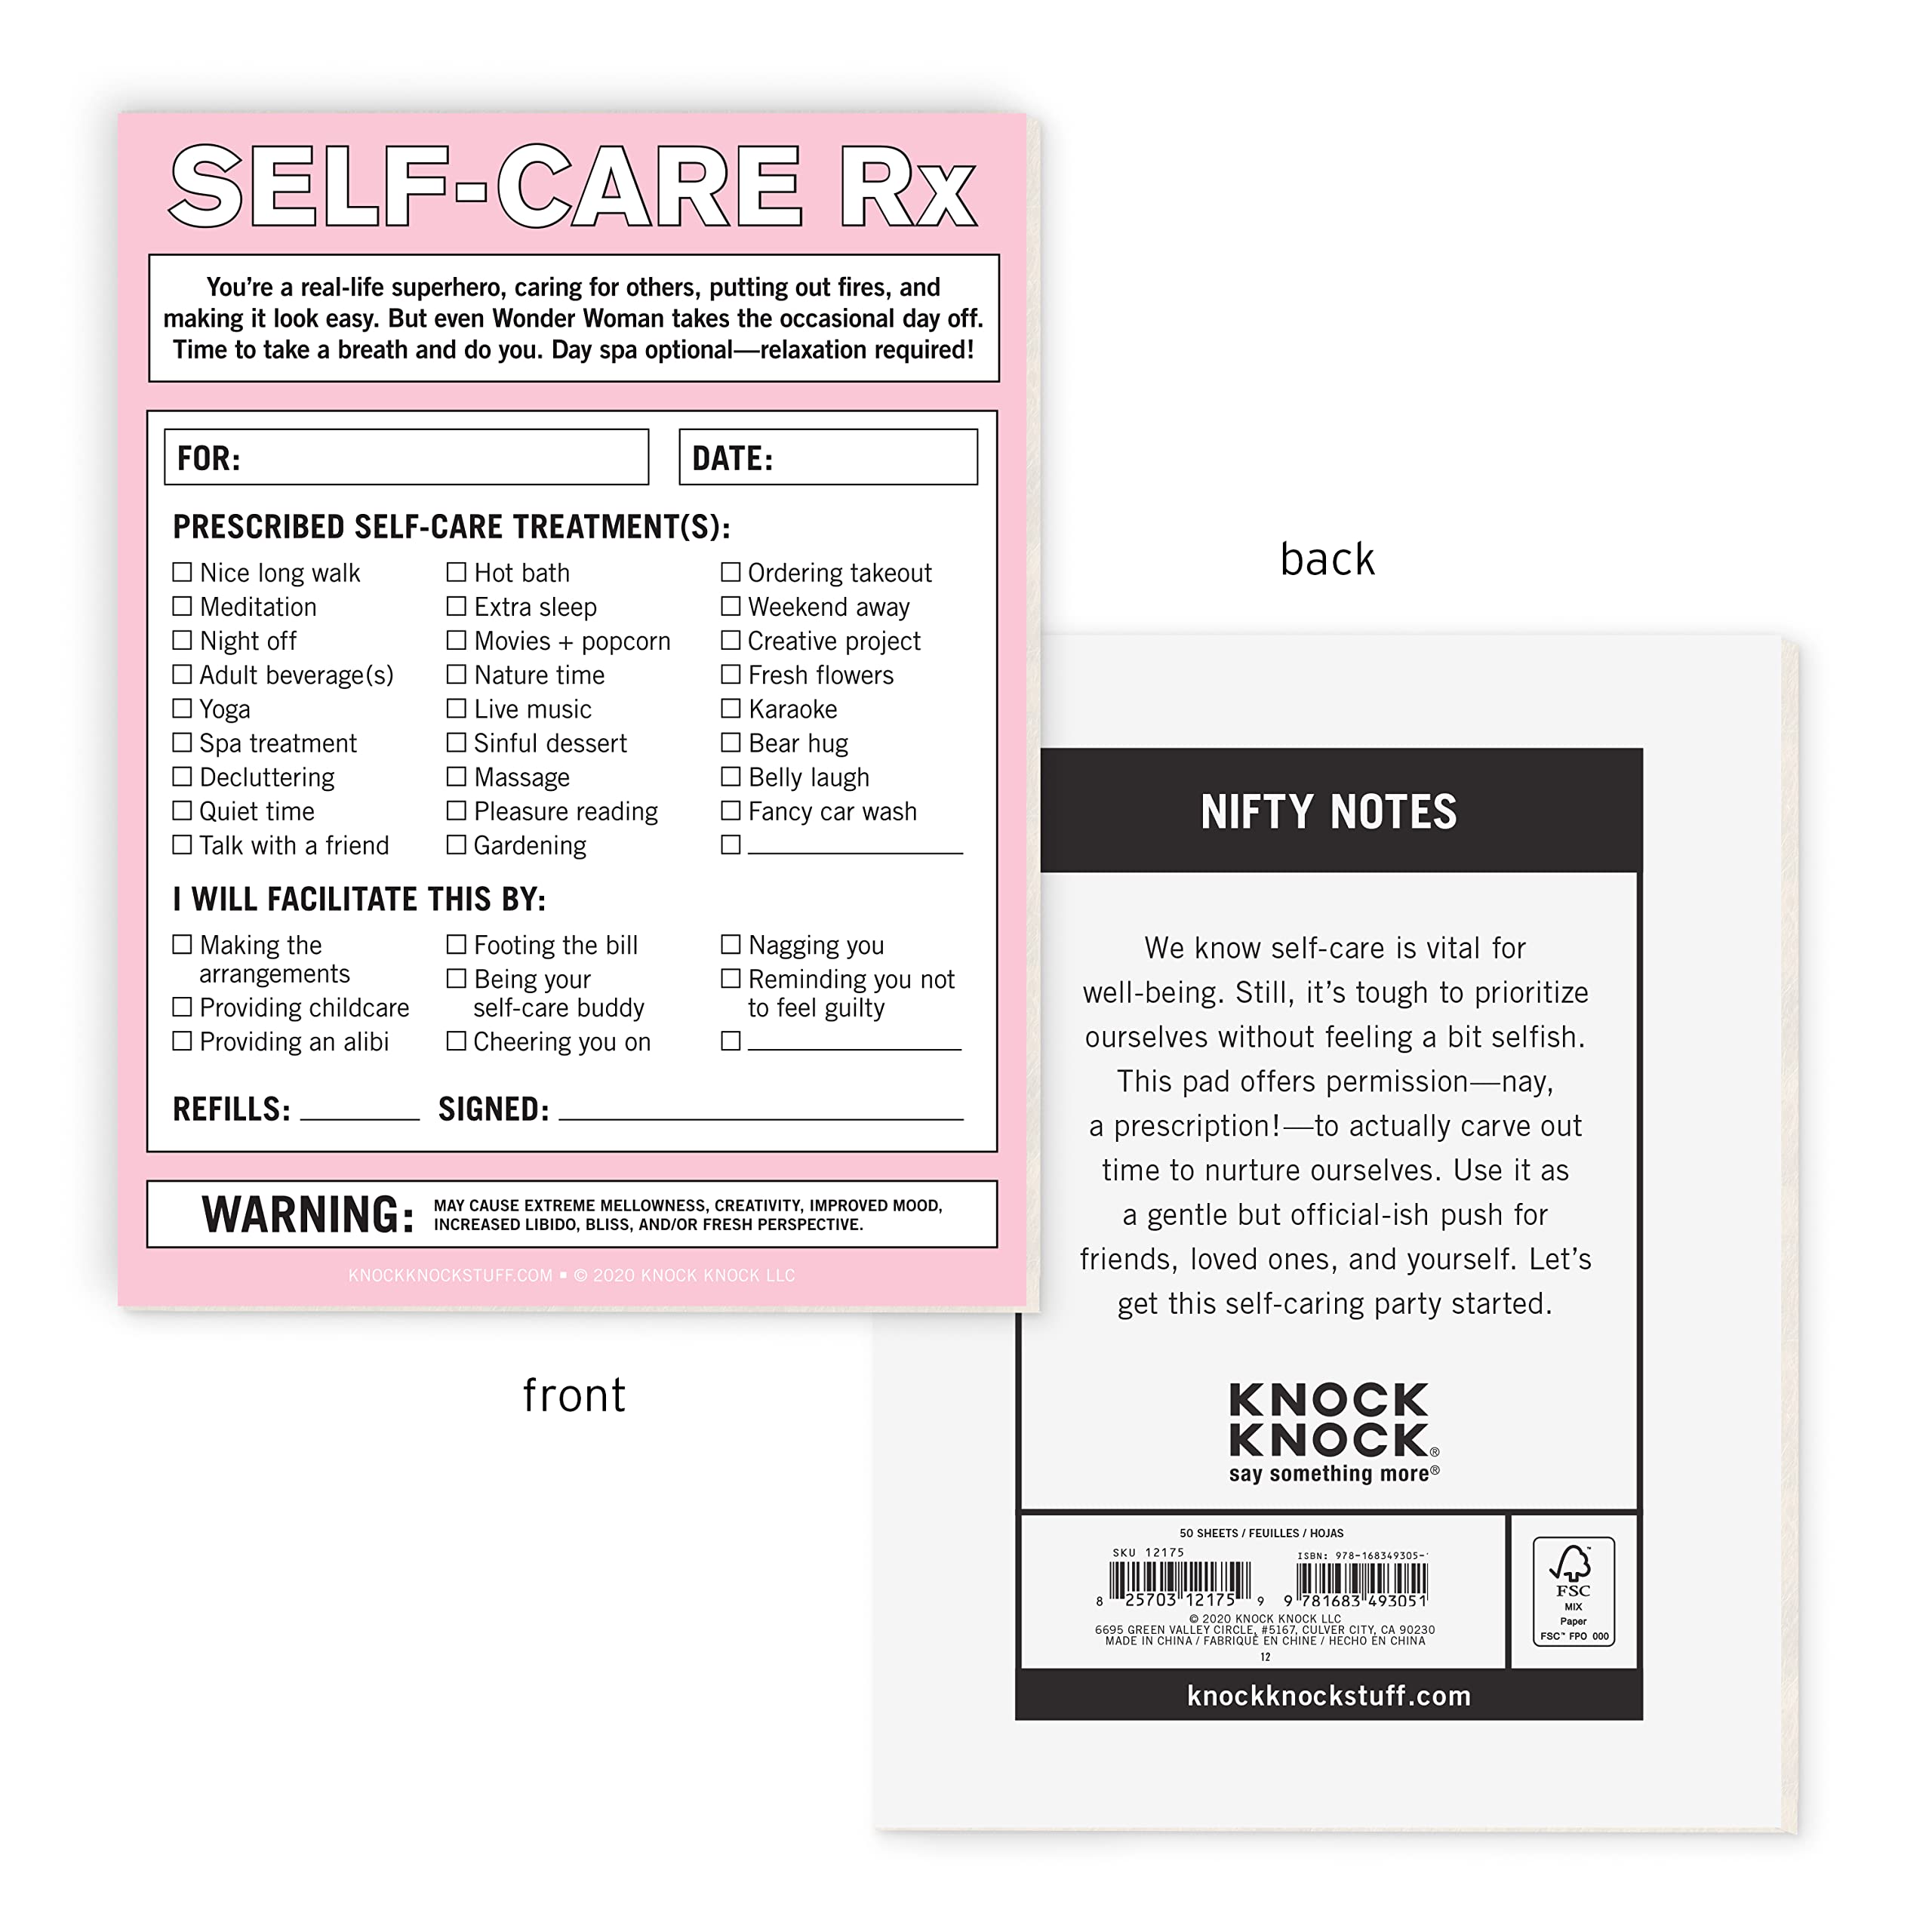 Knock Knock Self-Care RX Nifty Note - Self Care Gifts & Funny Gift Ideas for Friends, 4 x 5.25-inches